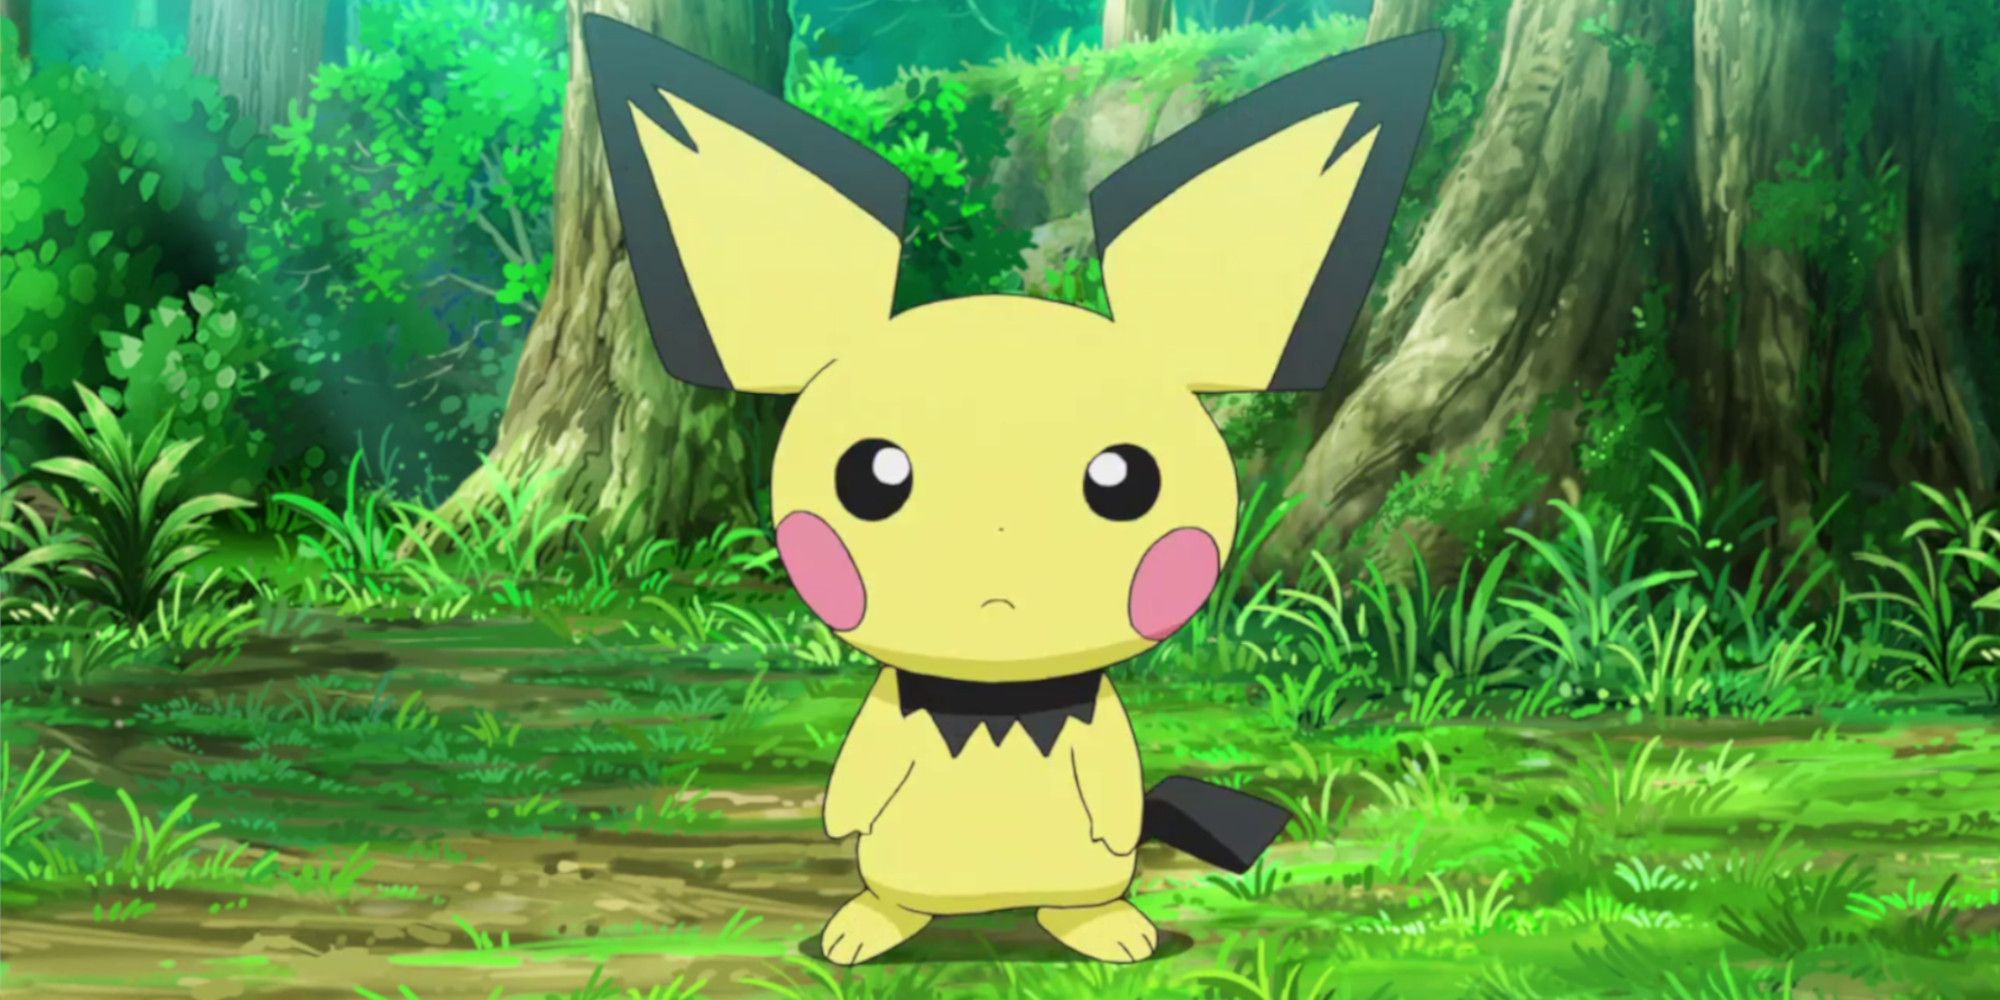 Pokemon': Here's How Pichu Could Look In 'Detective Pikachu'